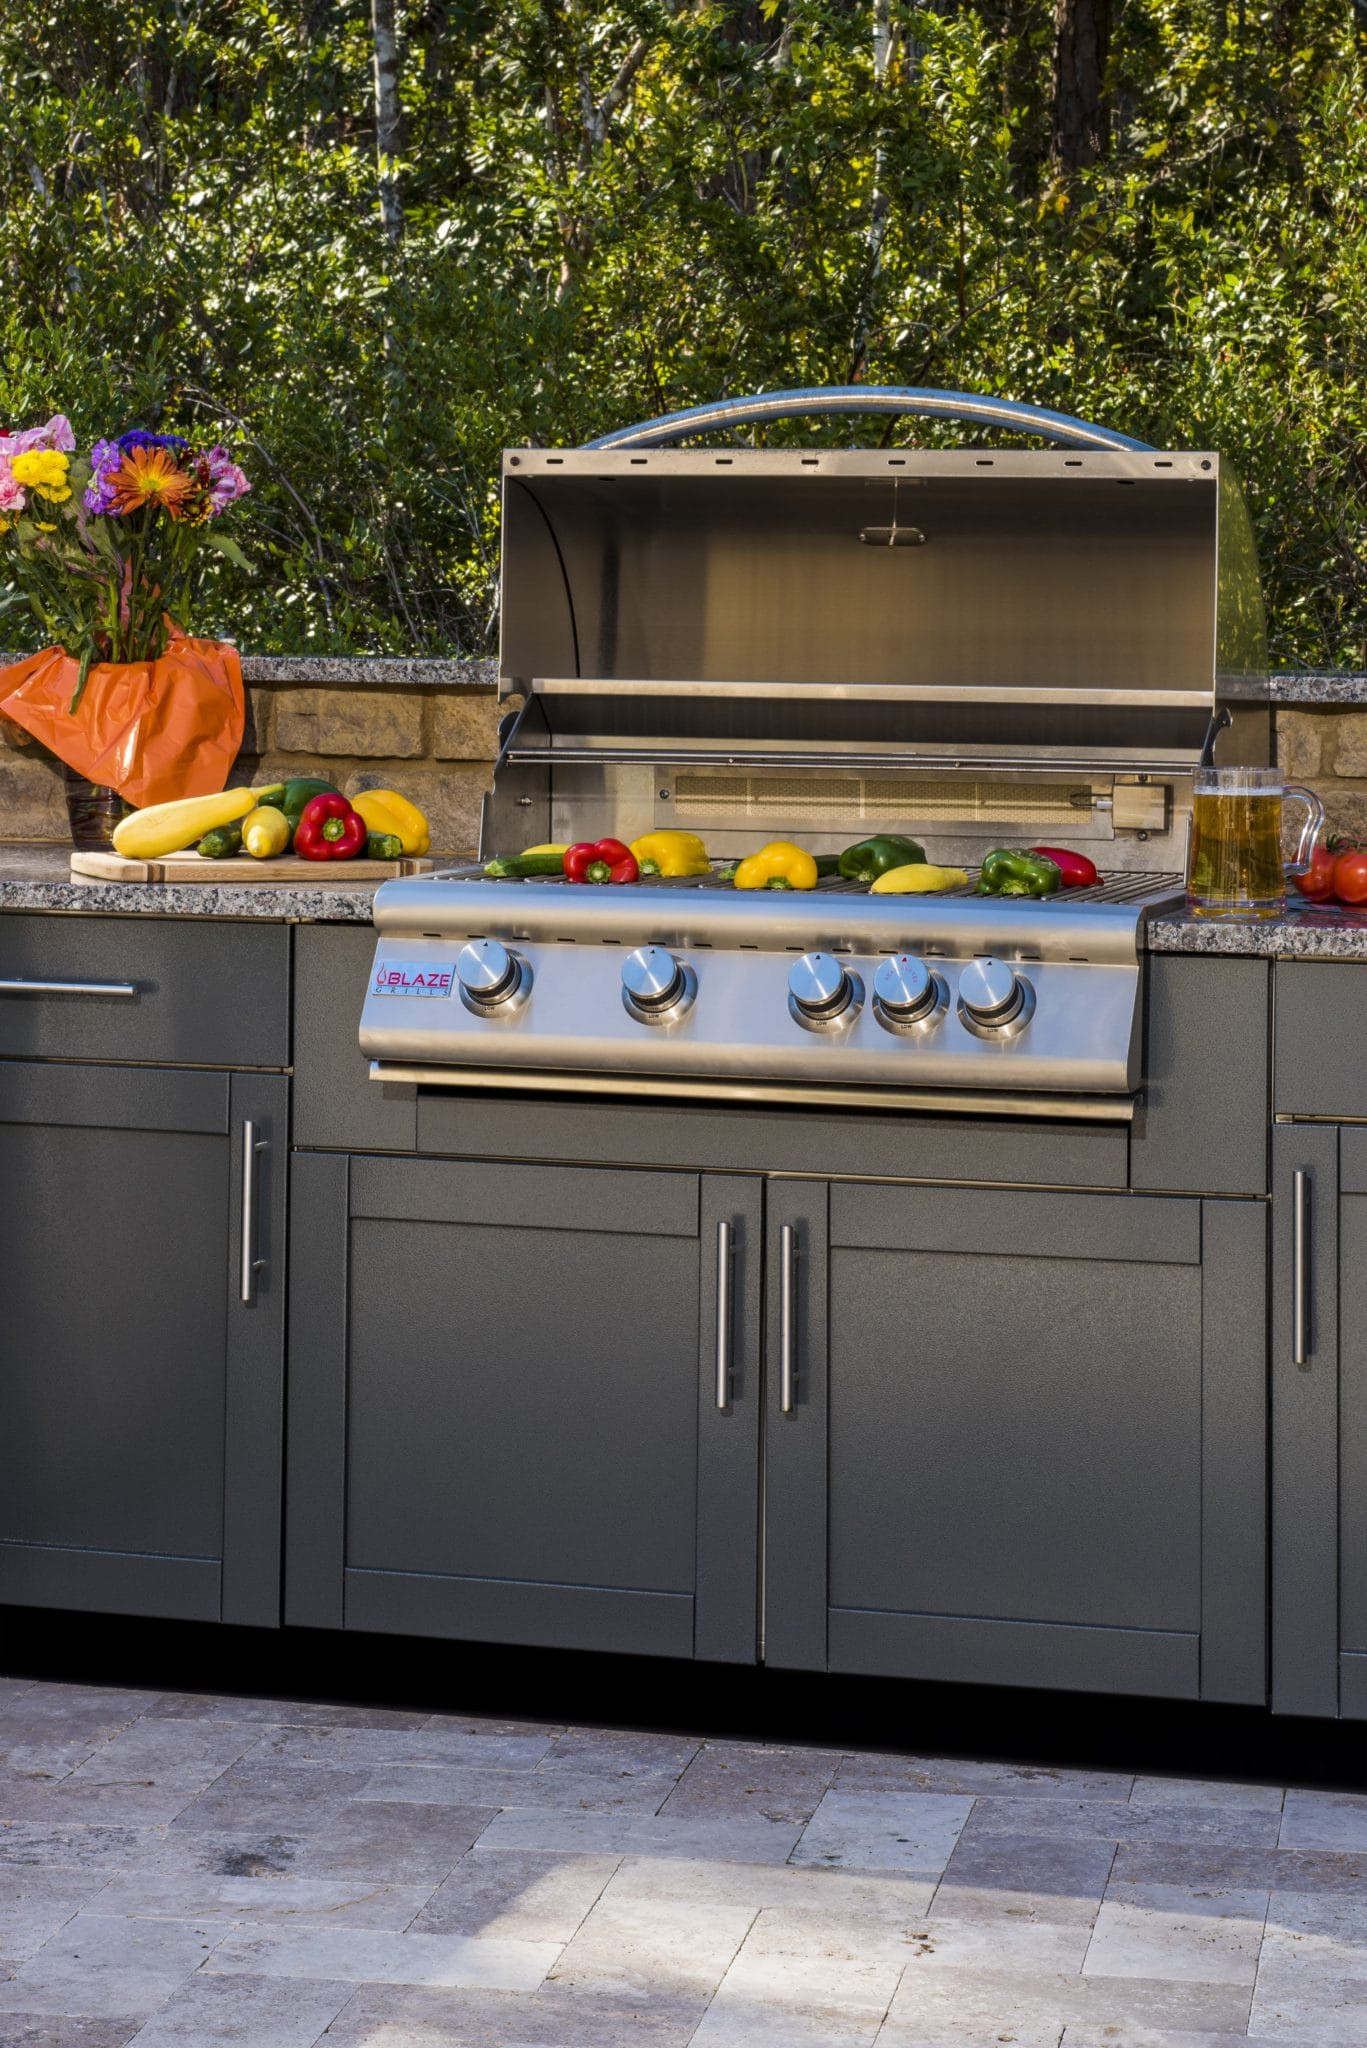 Danver Outdoor Kitchen
 Outdoor Kitchen Designs Ideas & Plans for Any Home